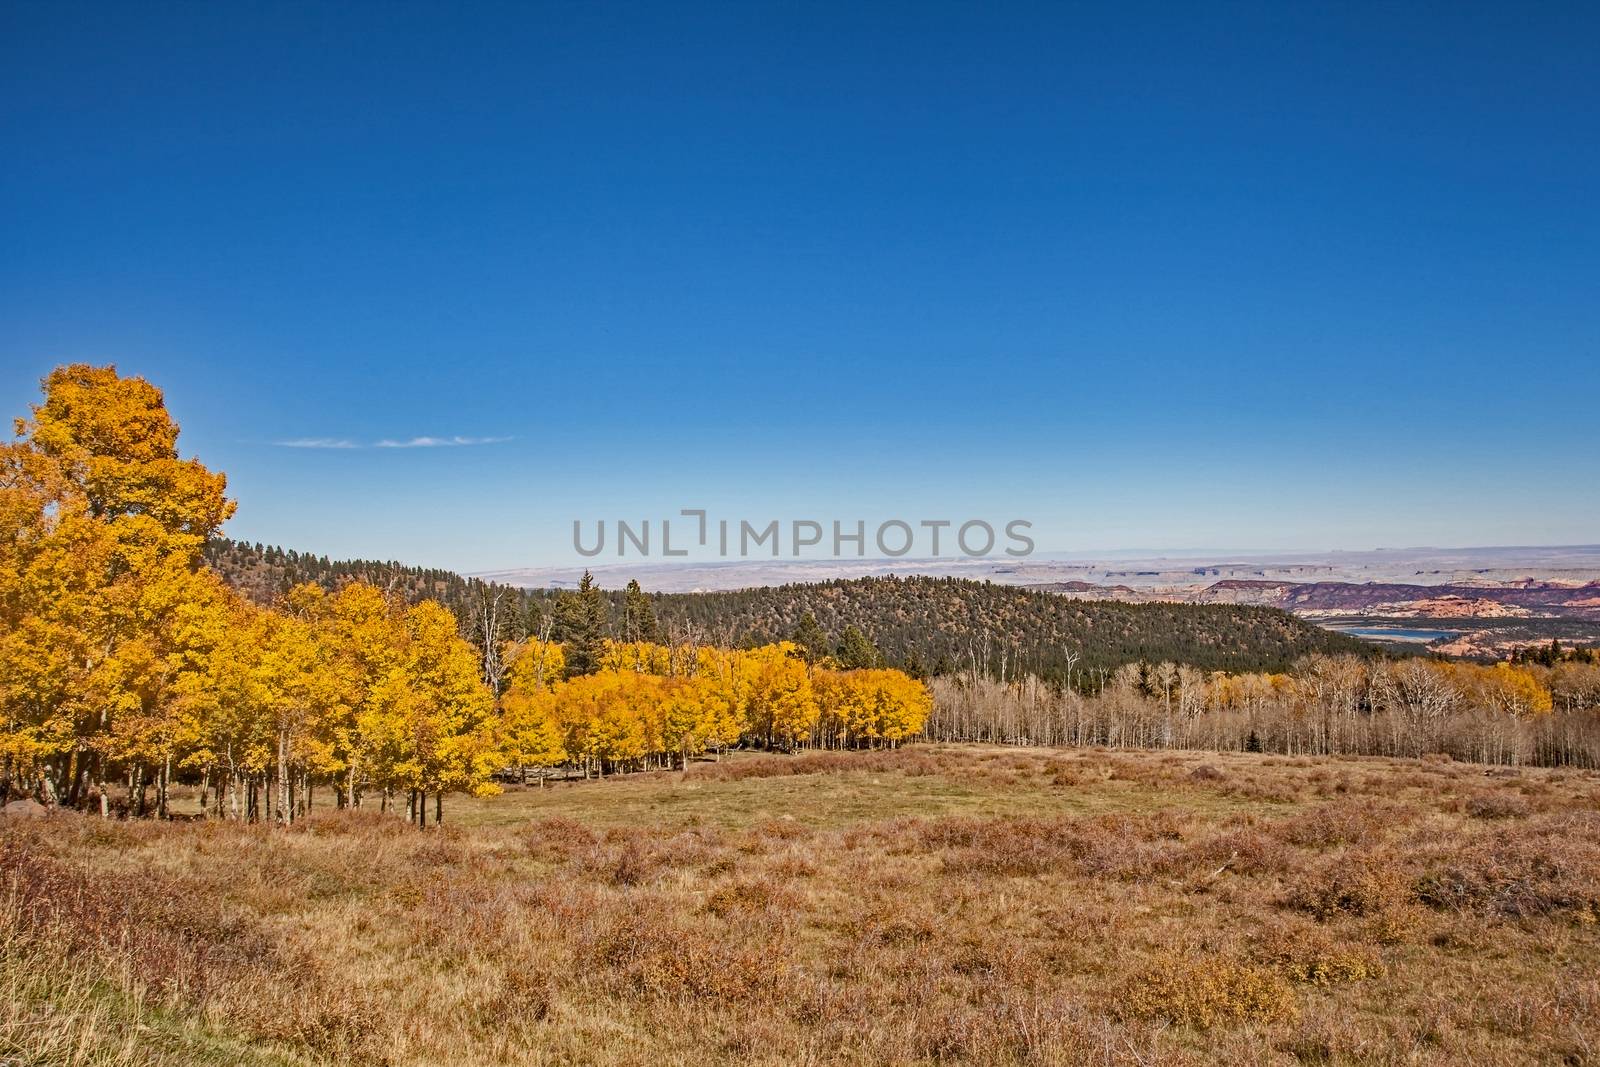 Quacking Aspen on the Scenic Byway 2 by kobus_peche